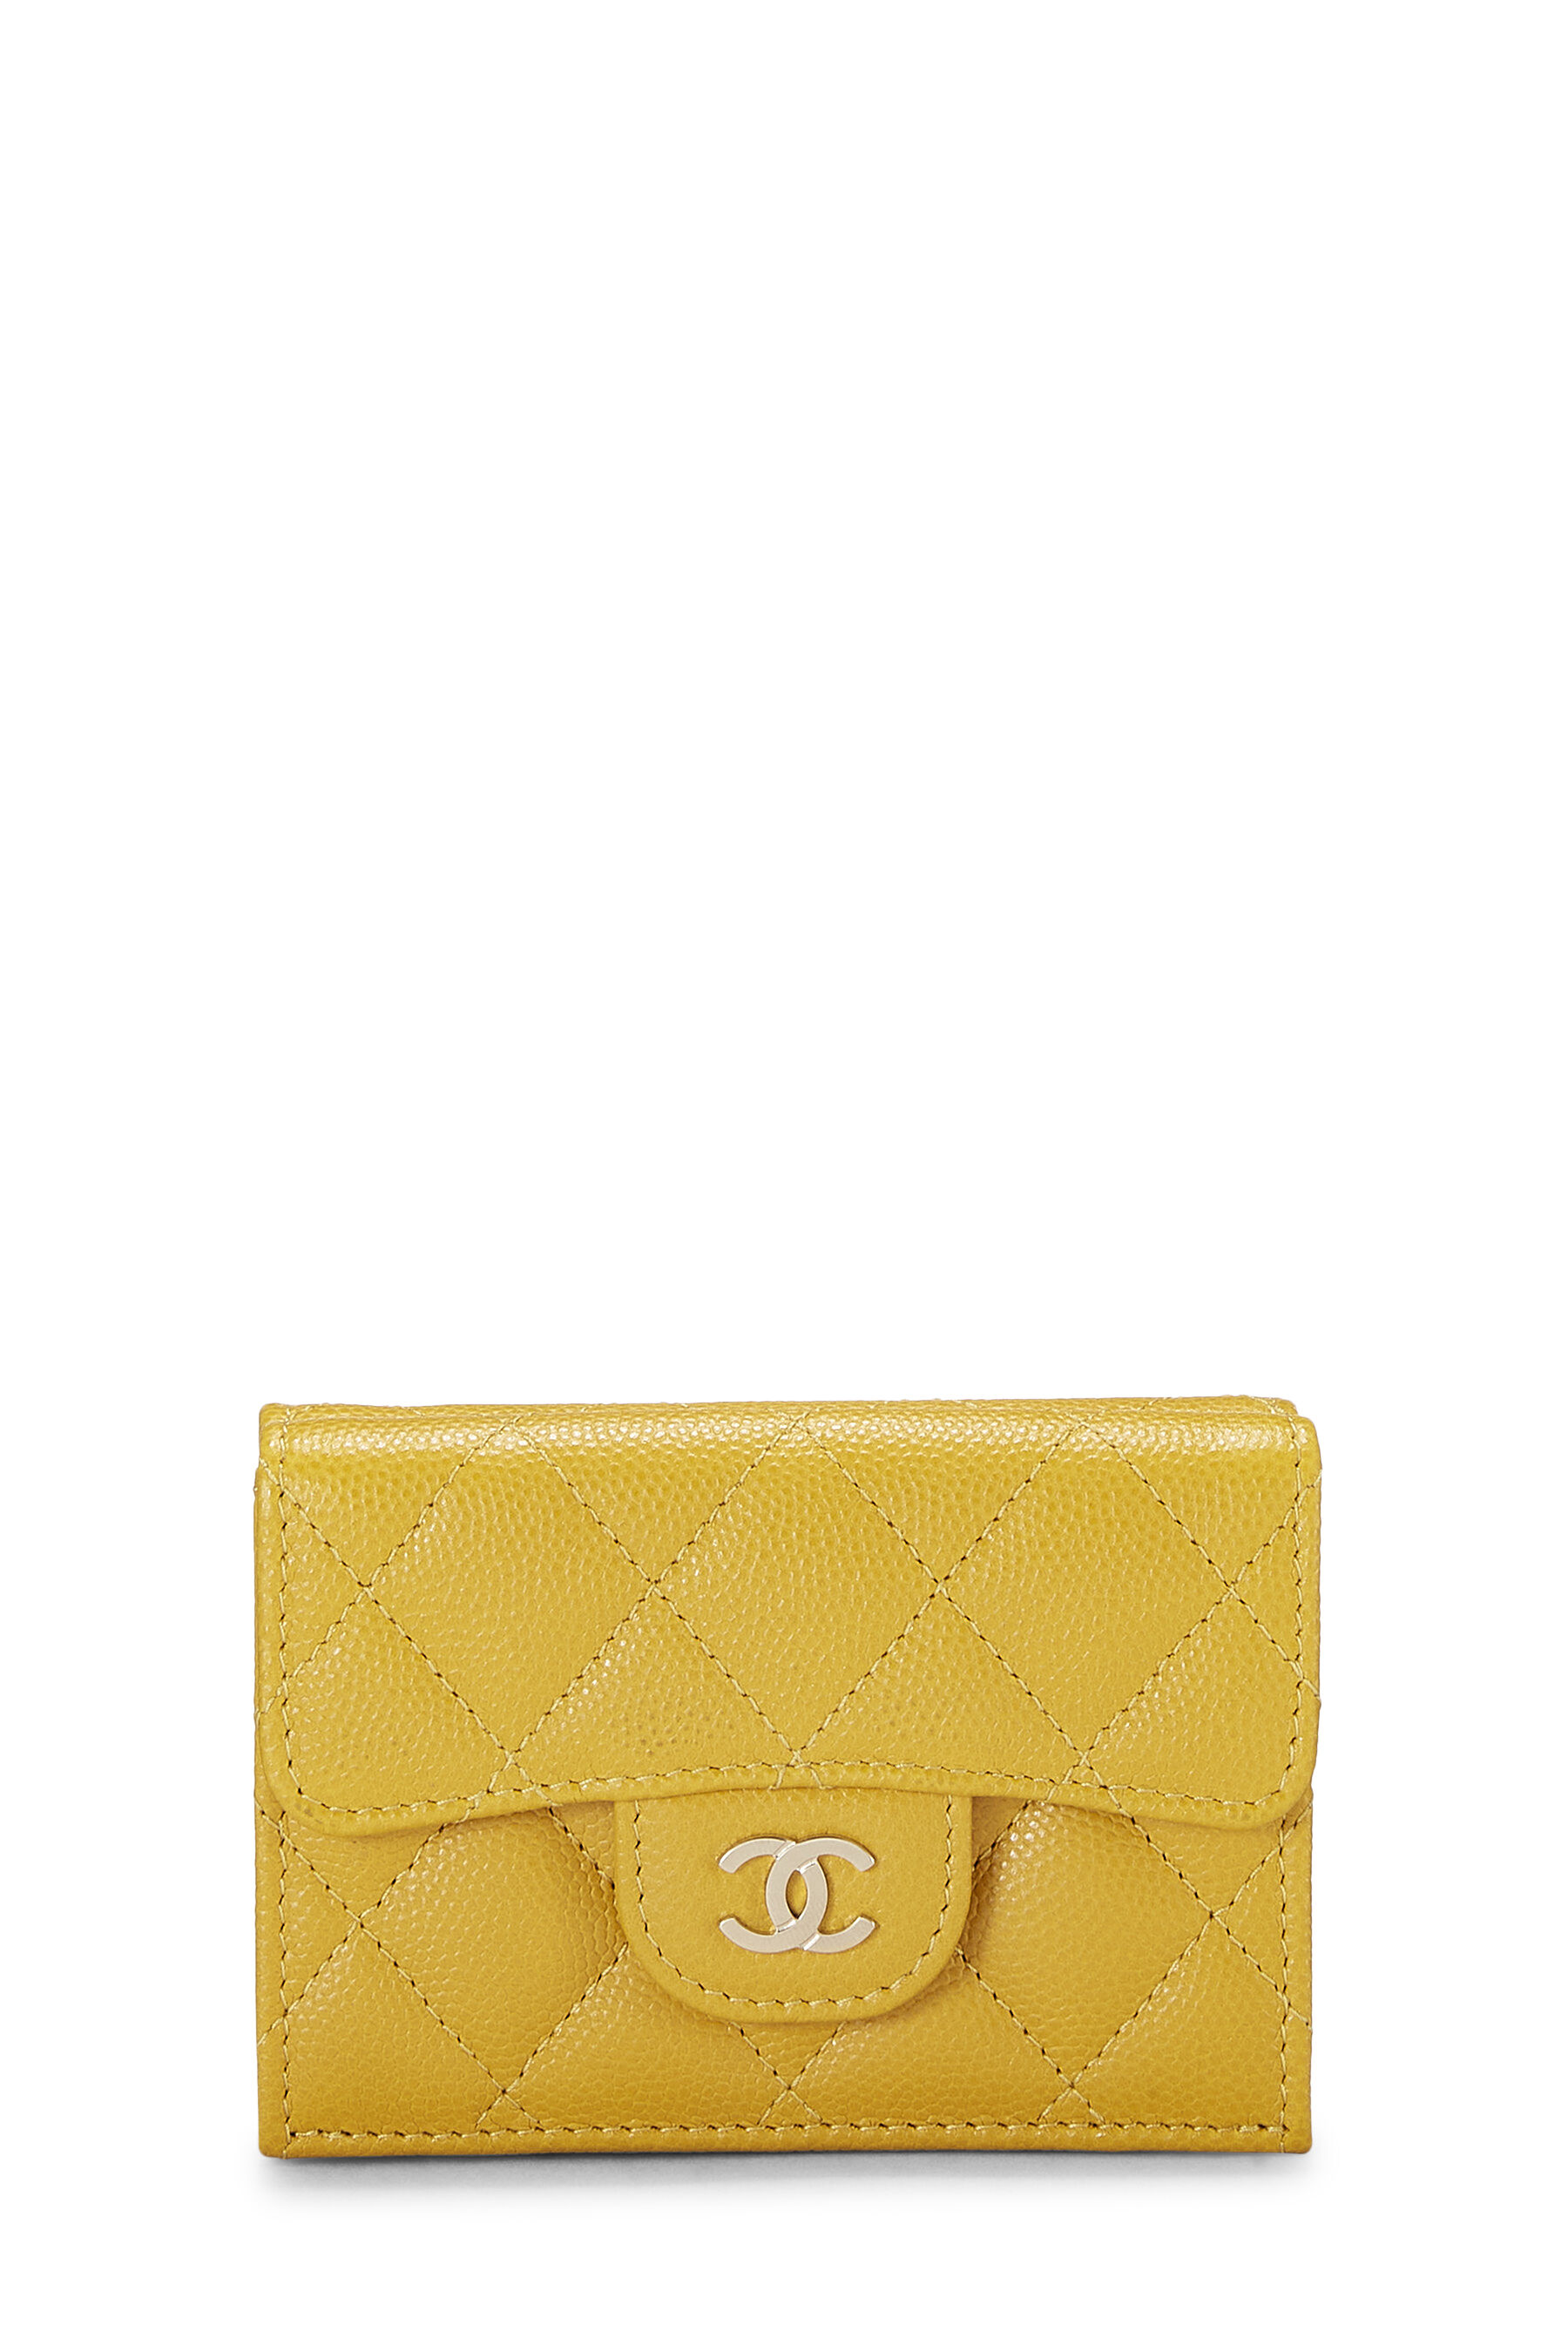 CHANEL Caviar Quilted Compact Flap Wallet Yellow 1169263